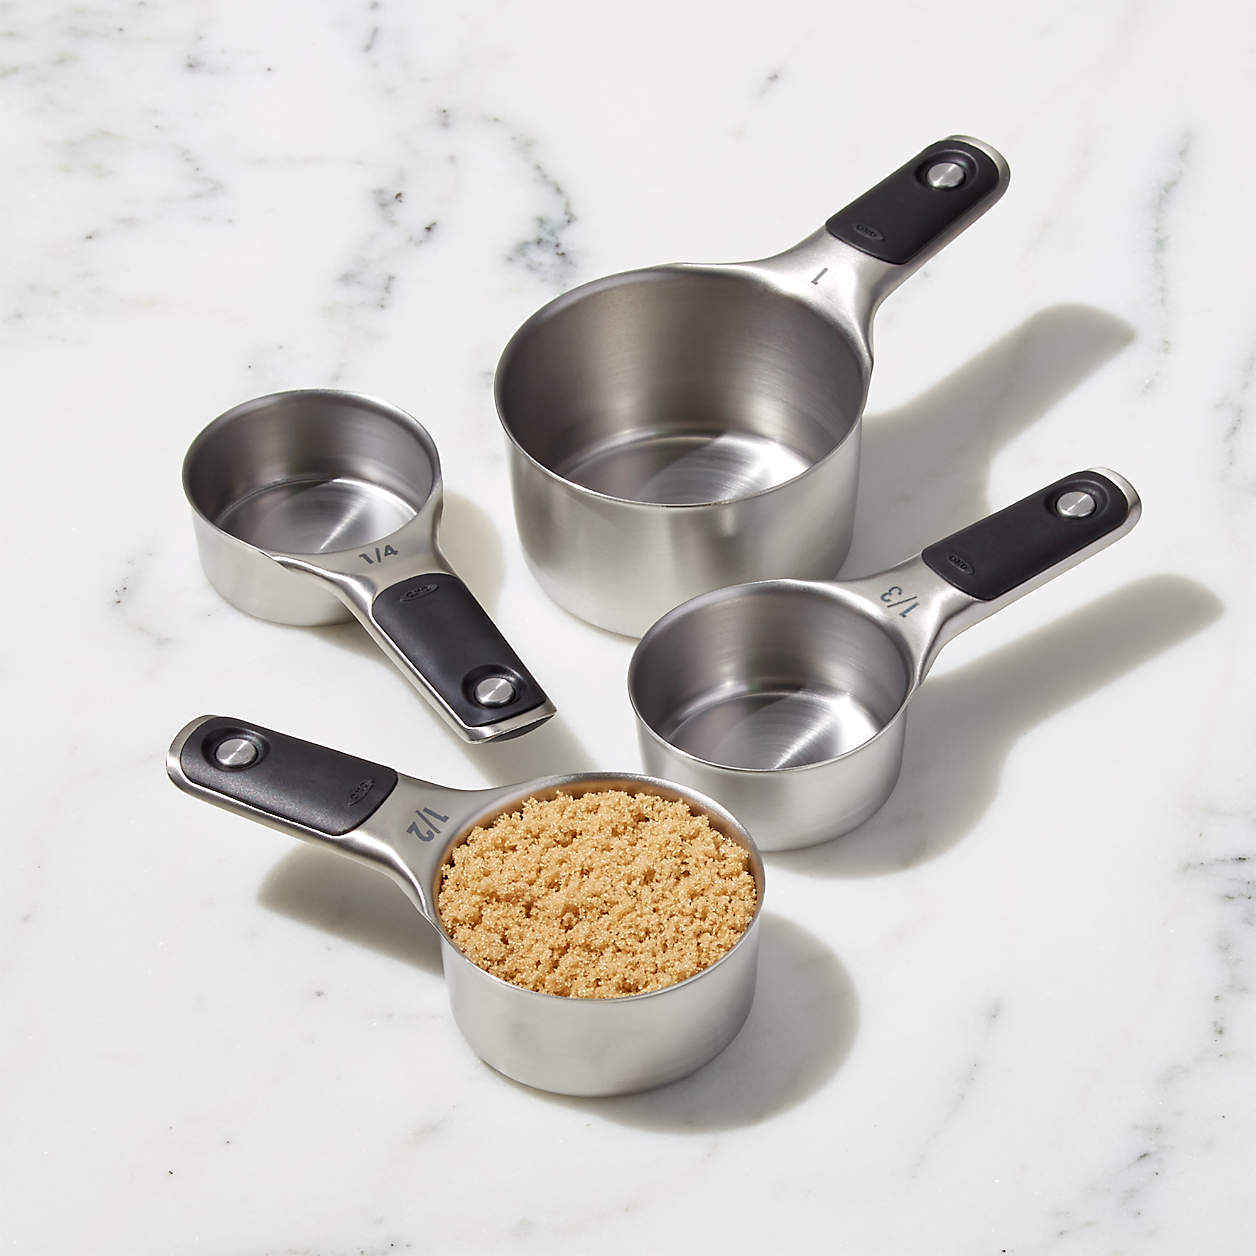 measuring cups on marble counter, one filled with brown sugar, the others empty.